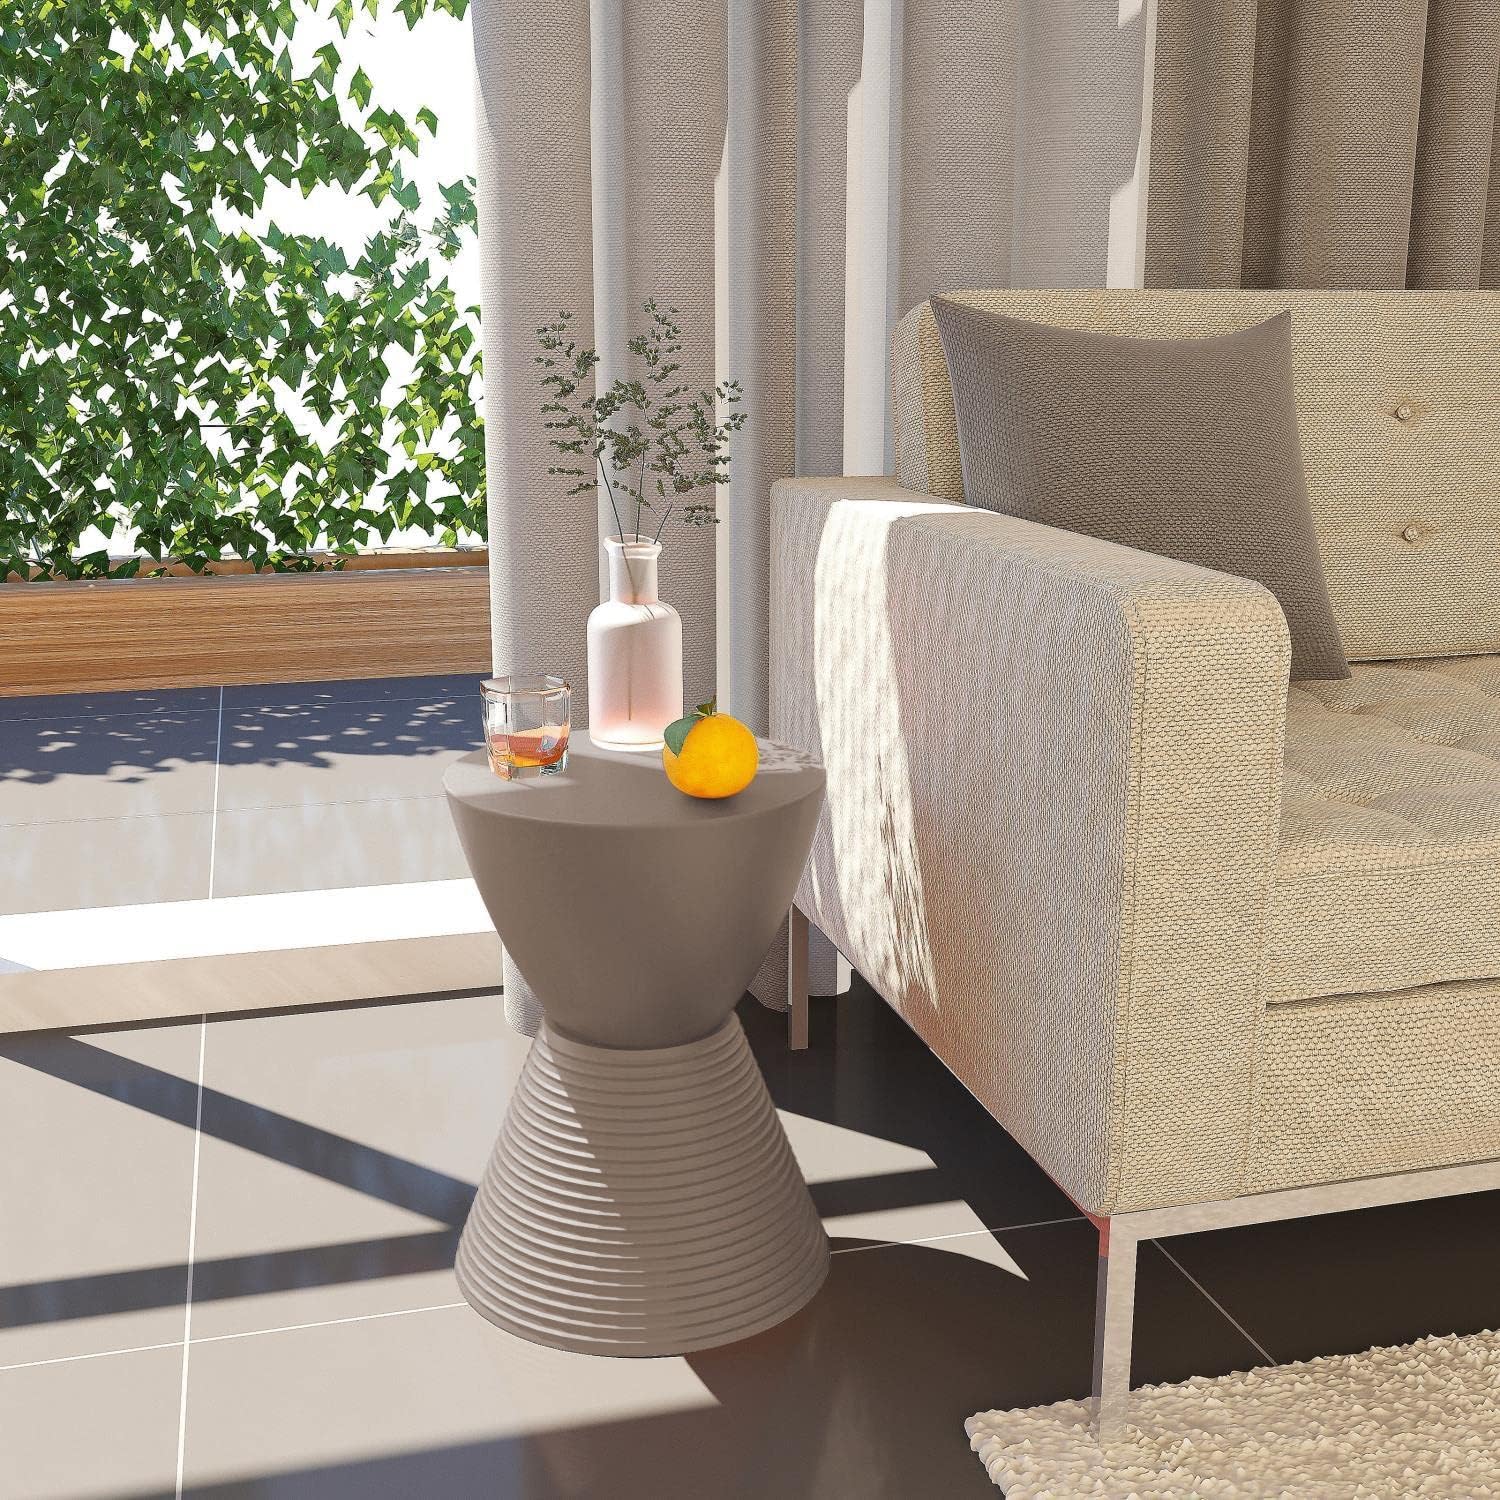 LeisureMod Boyd Modern Accent Side Table End Table Indoor and Outdoor Use, 16.75" H x 11.75" W x 11.75" D (Taupe)